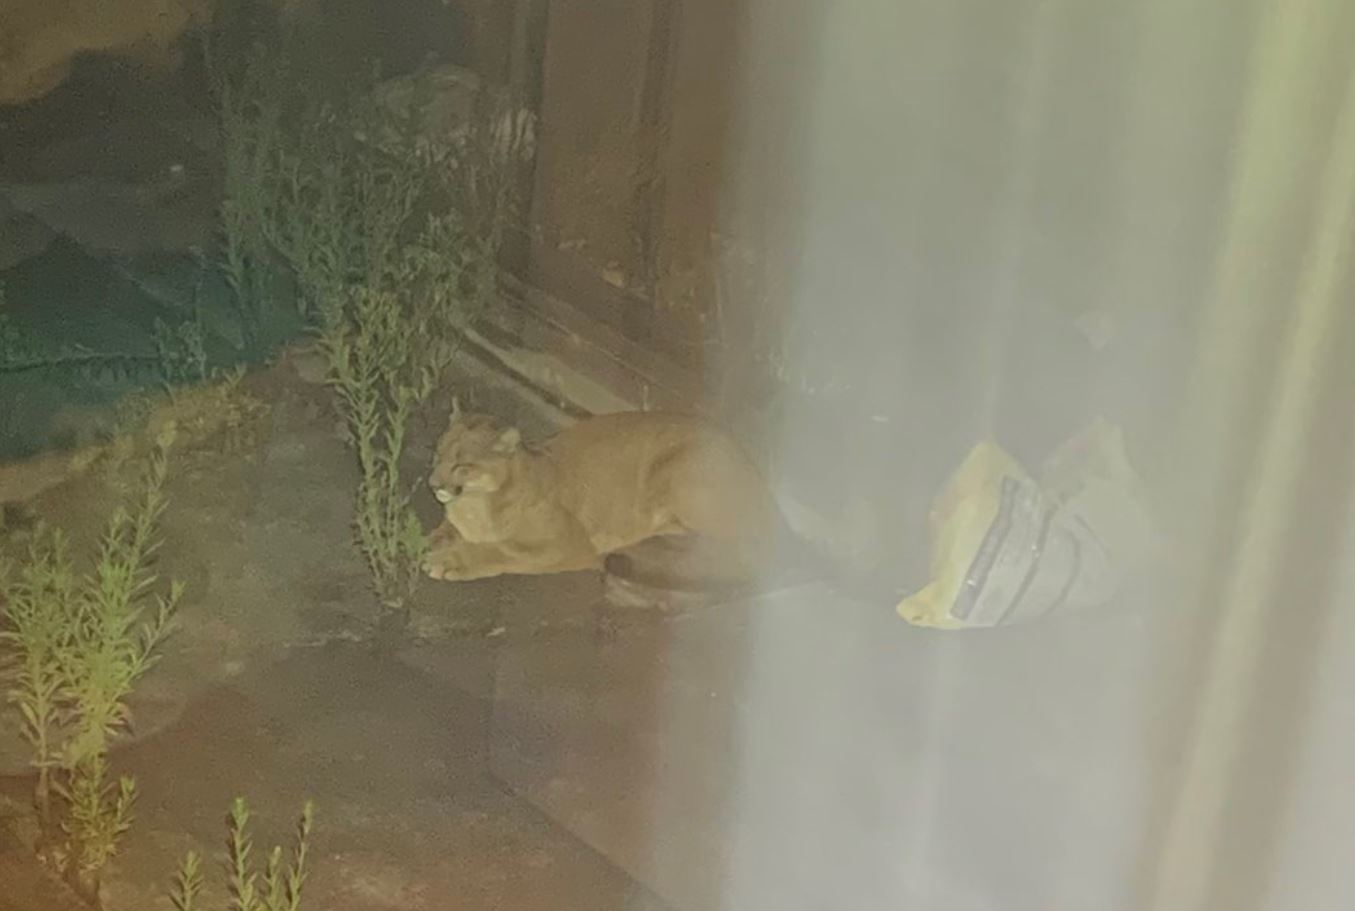 Mountain Lion Spotted In Backyard of Daly City Home; Residents Warned